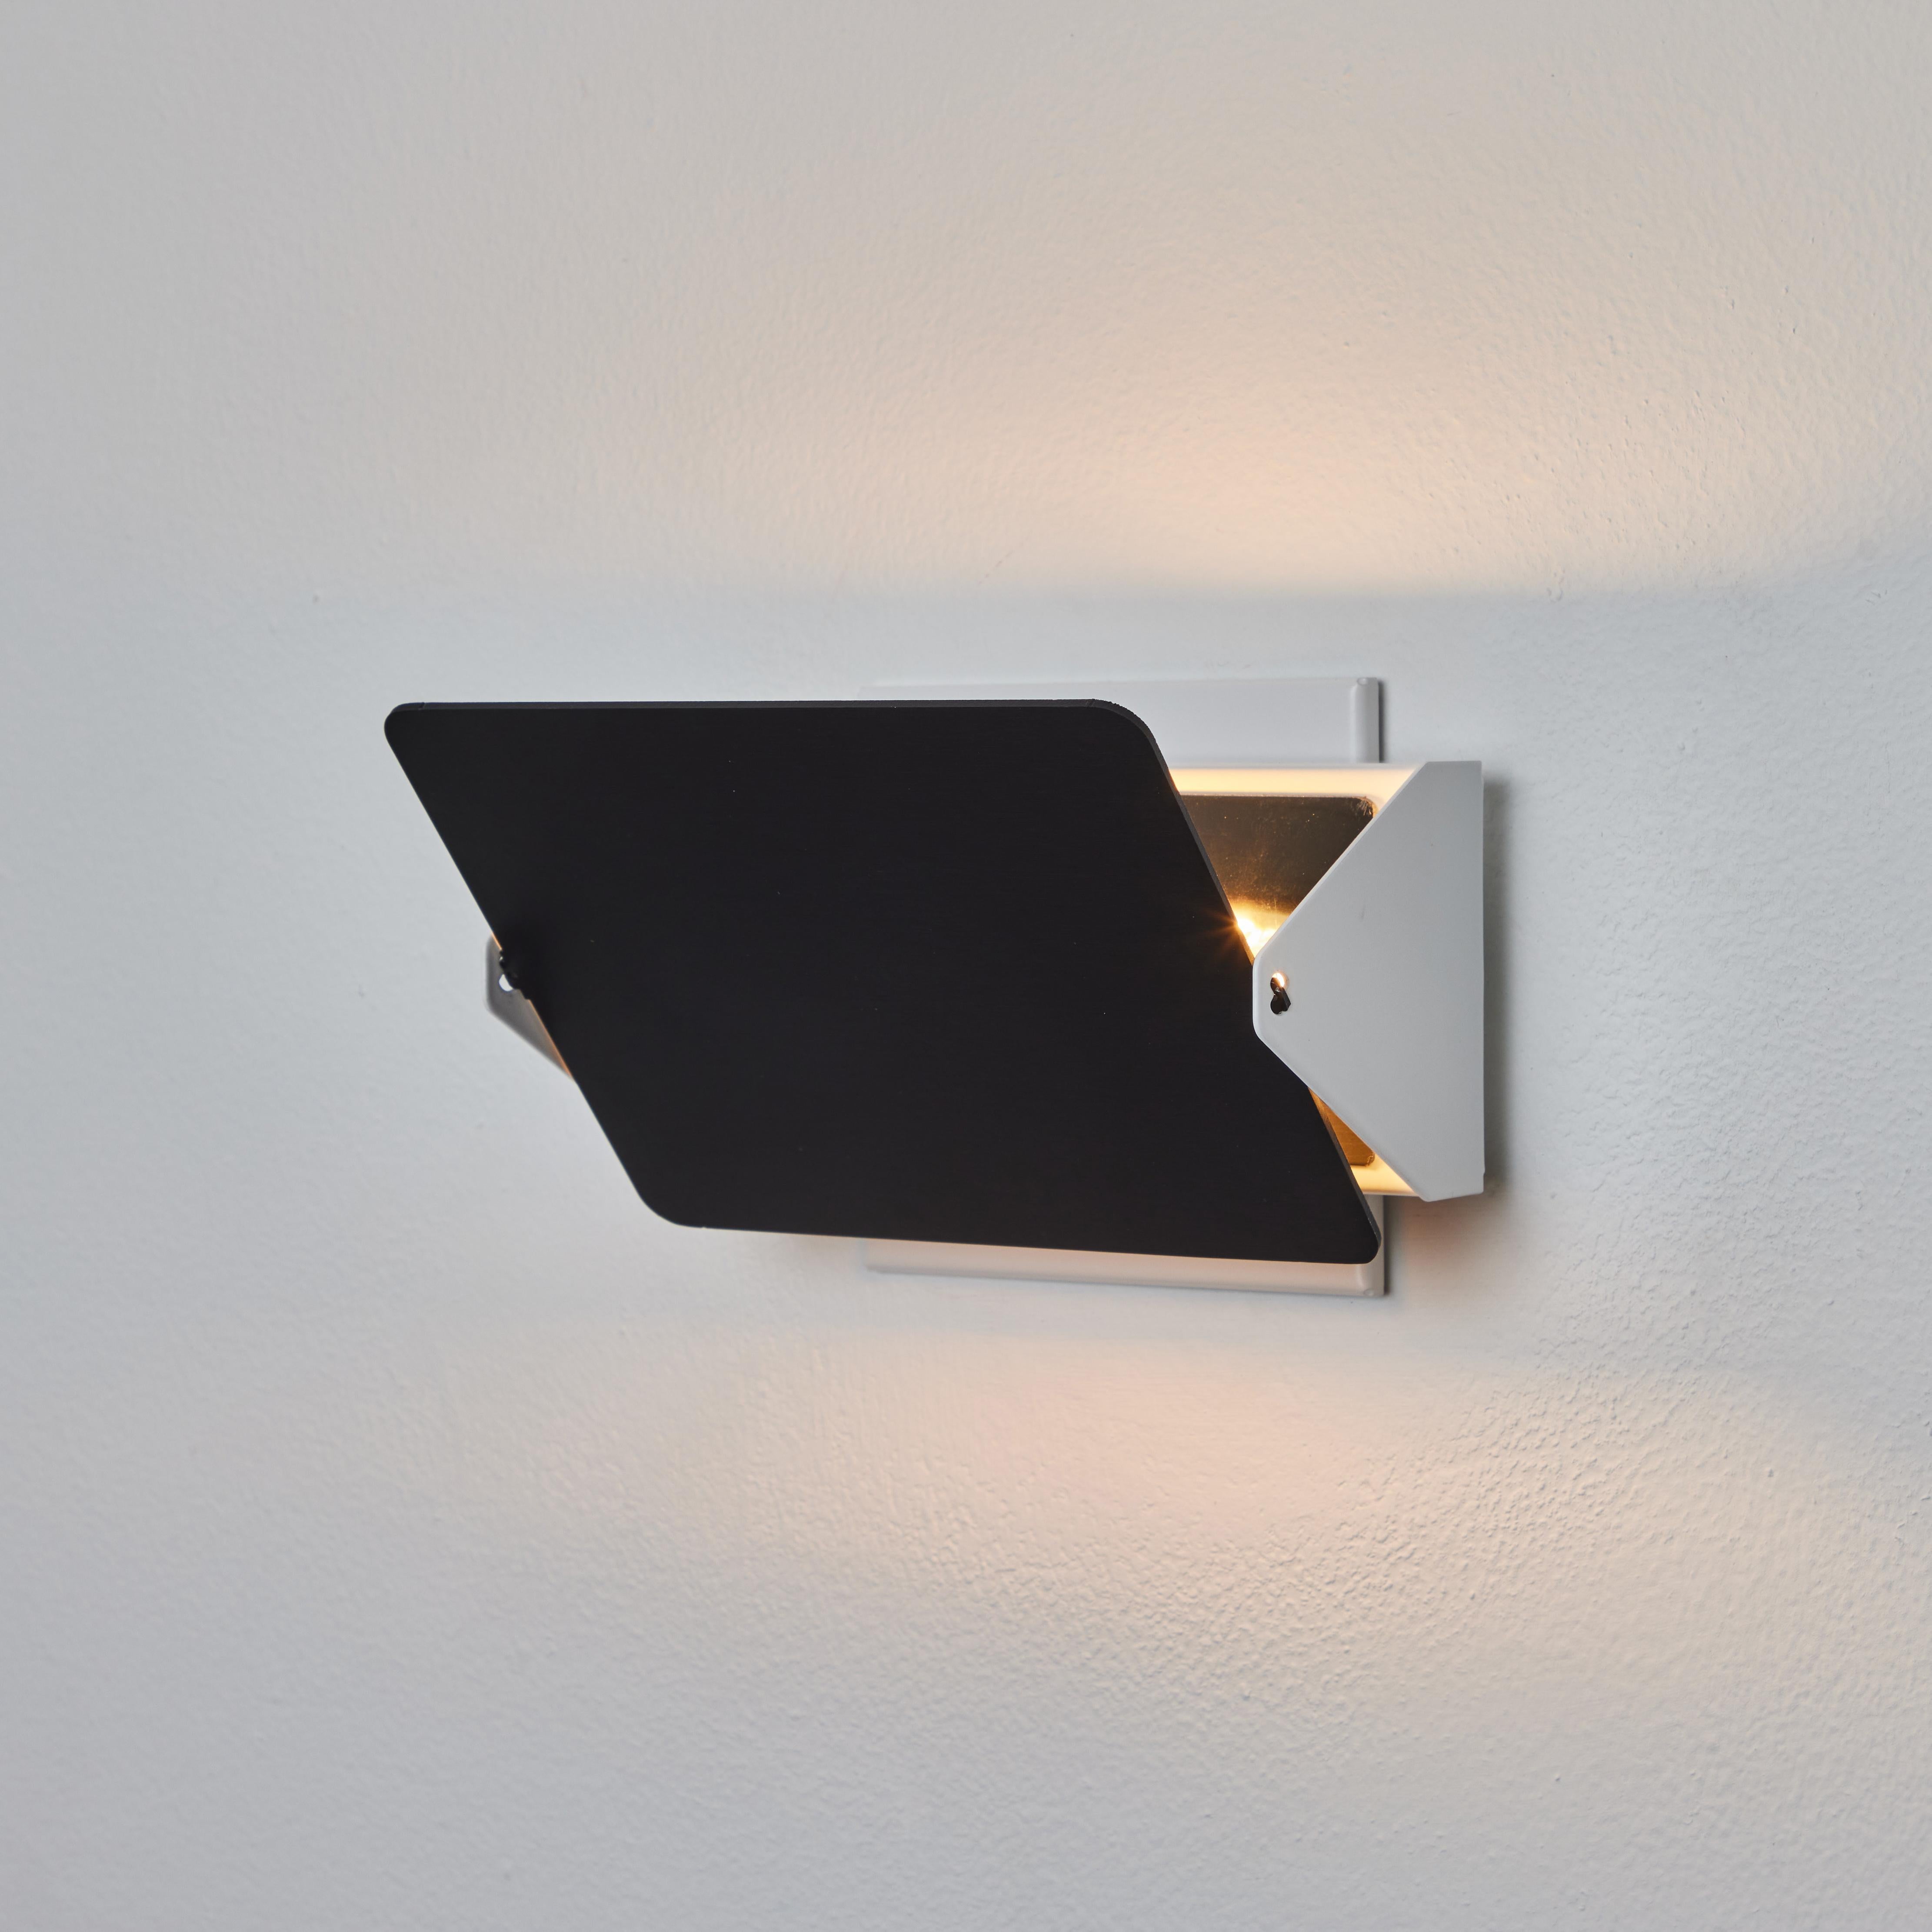 Charlotte Perriand 'Applique À Volet Pivotant' Wall Light in Black for Nemo In New Condition For Sale In Glendale, CA